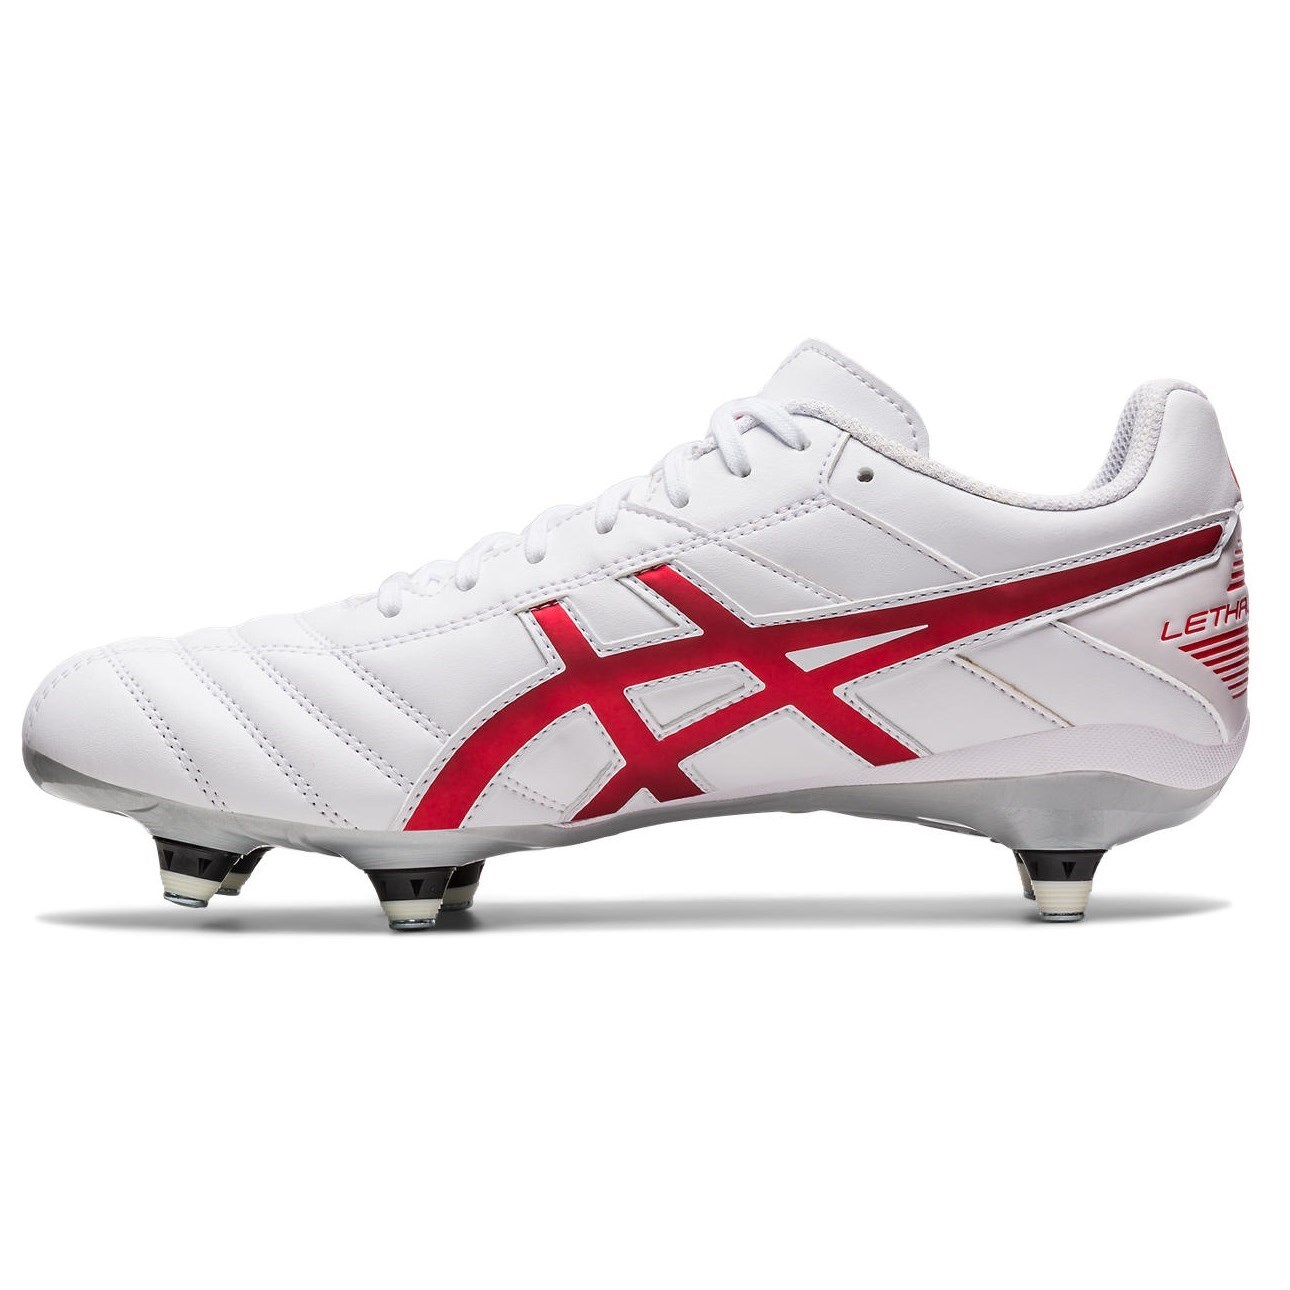 Asics Lethal Speed ST 2 - Mens Football Boots - White/Classic Red ...